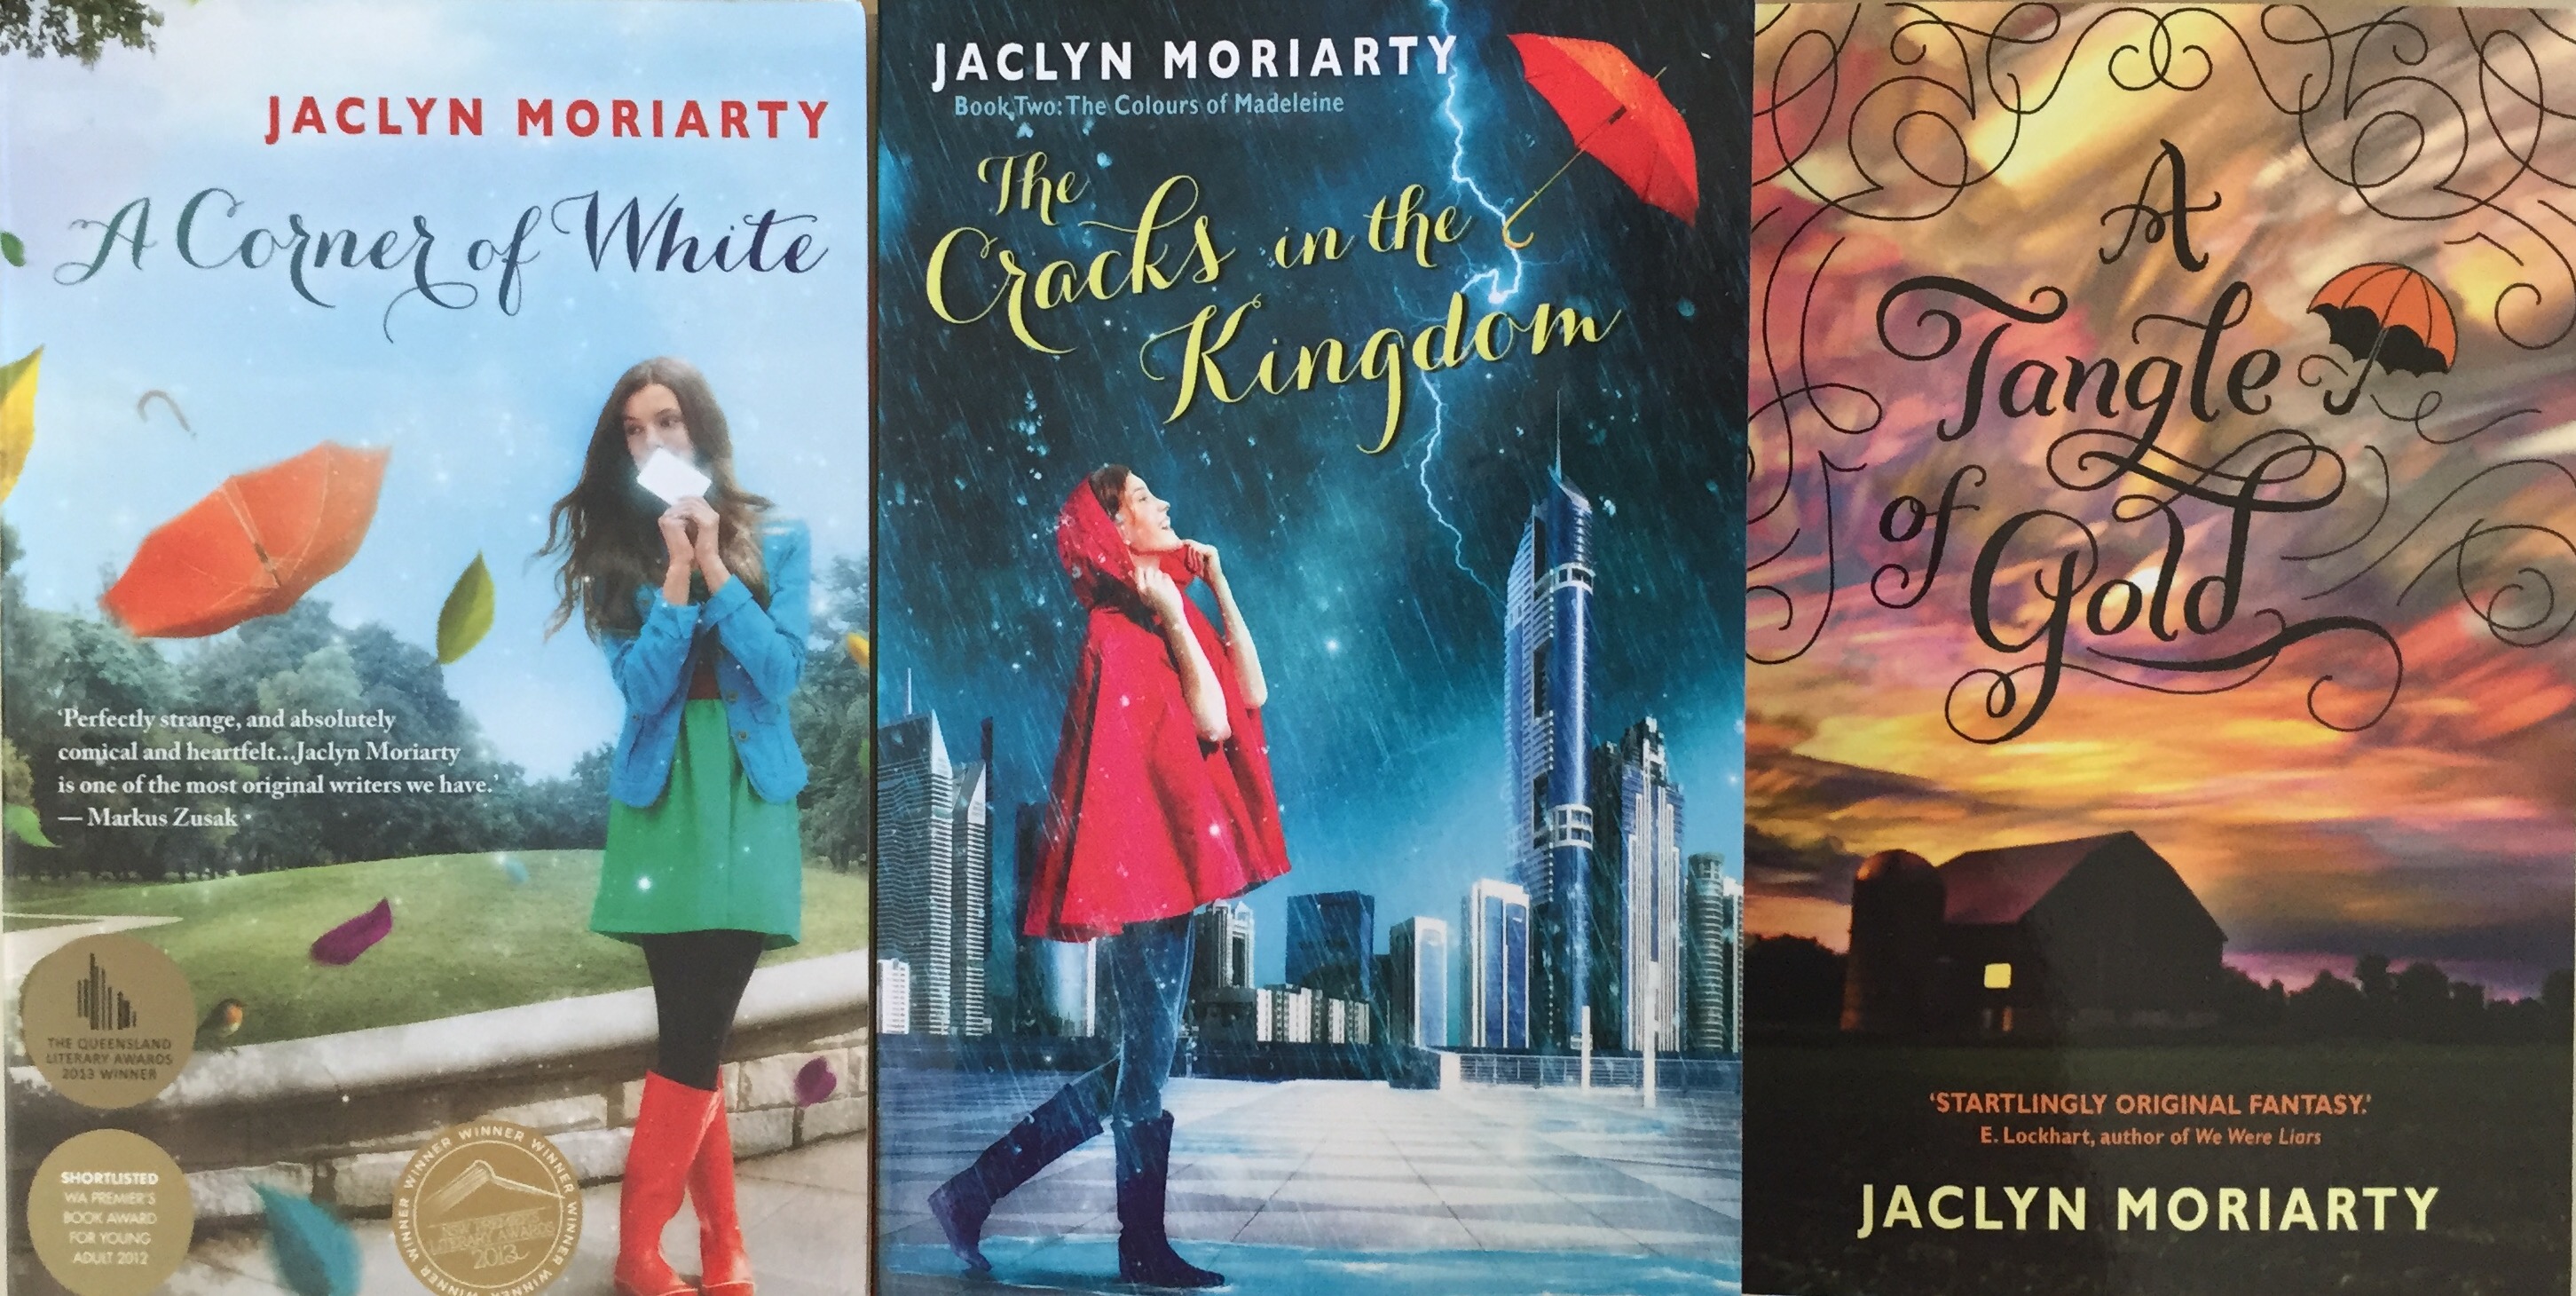 Three book covers from the Colours of Madeline series by Jaclyn Moriarty: A Corner of White, The Cracks in the Kingdom and A Tangle of Gold